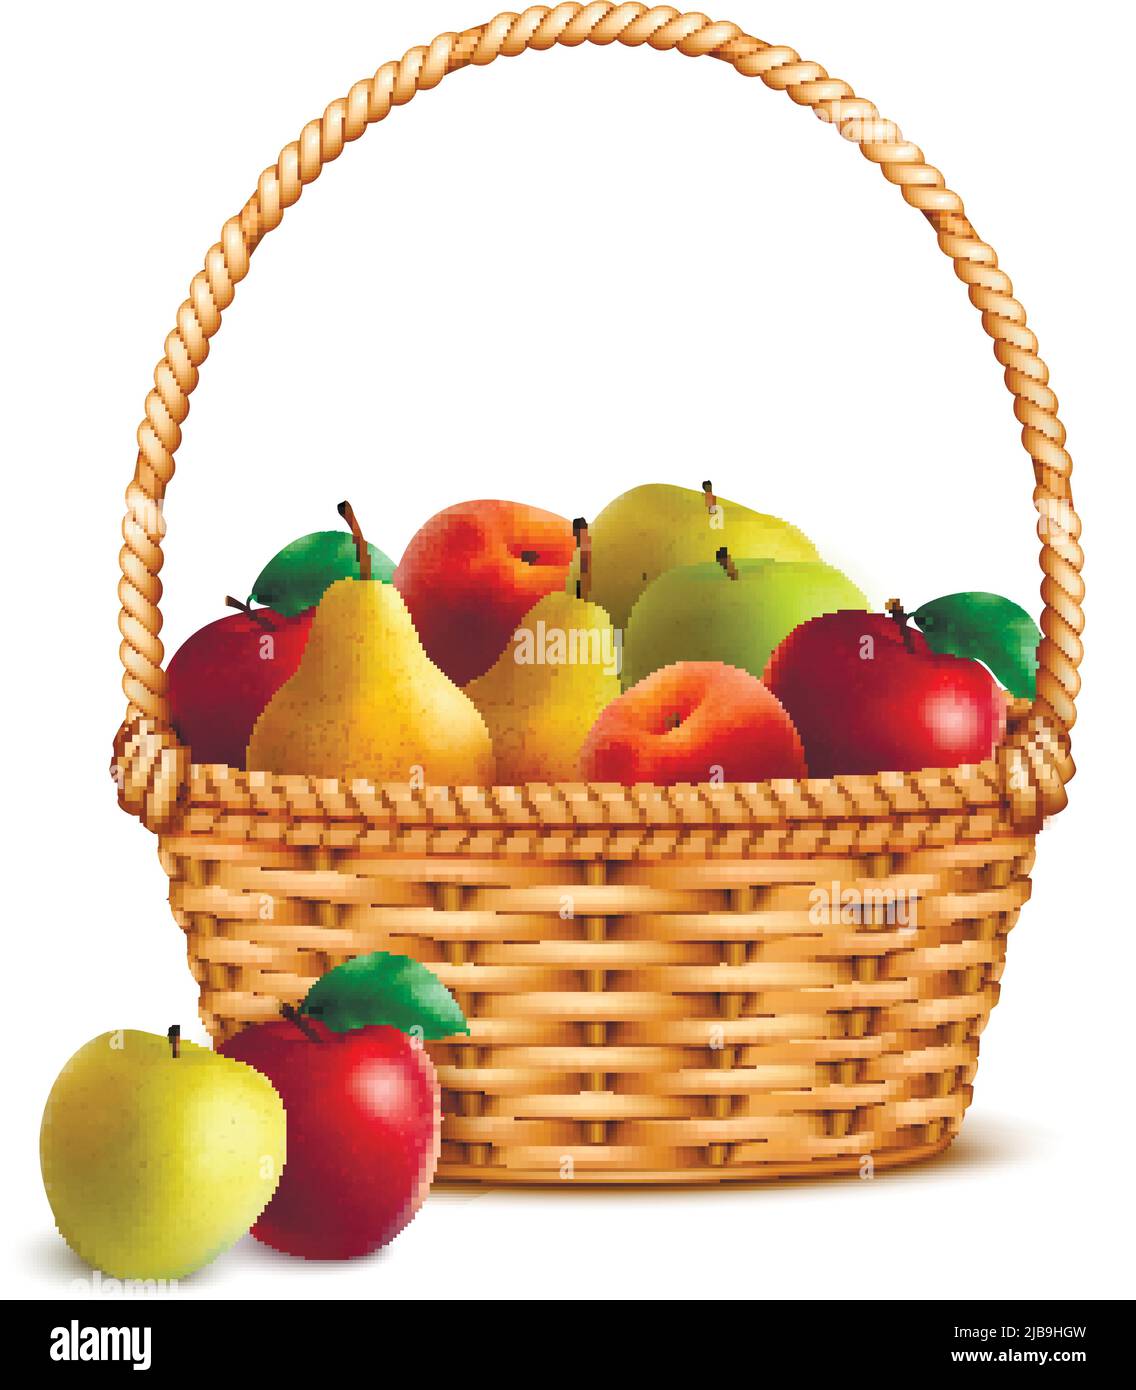 Willow wicker basket one handle full with ripe fresh farmer market fruits closeup realistic image vector illustration Stock Vector